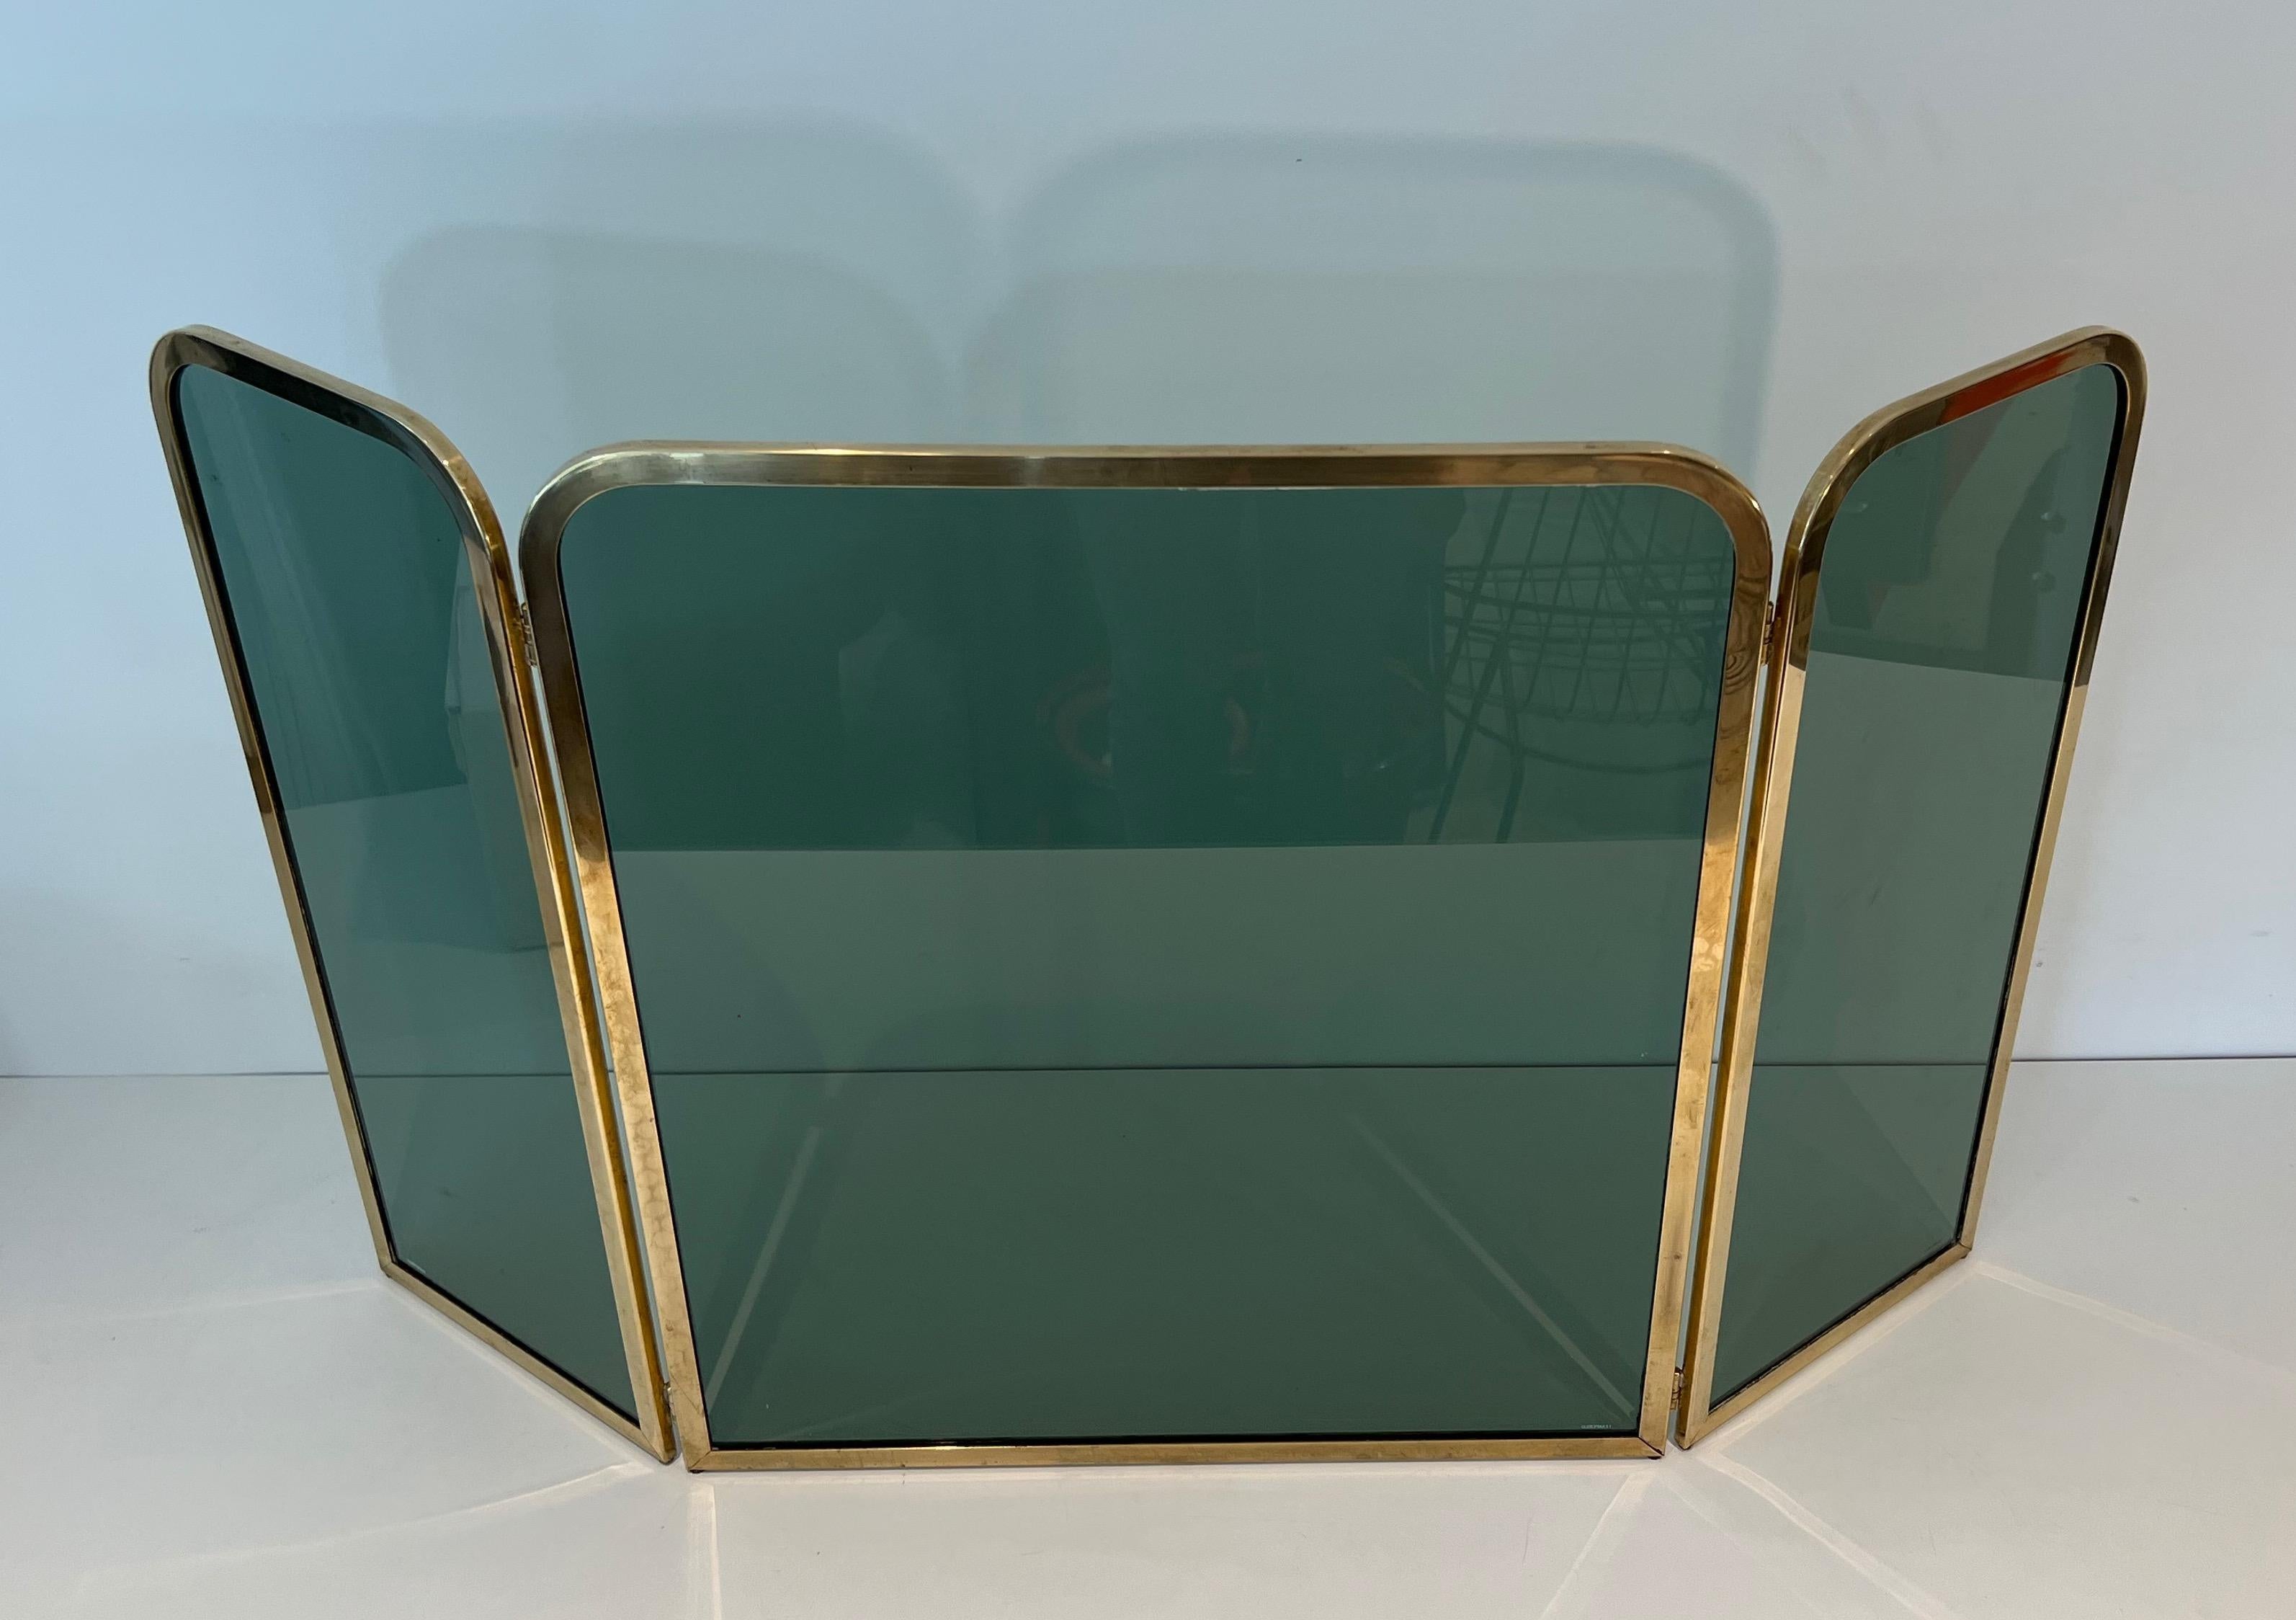 Fireplace Screen Made of 3 Greenish Glass Panels Surrounded by a Brass Frame For Sale 5